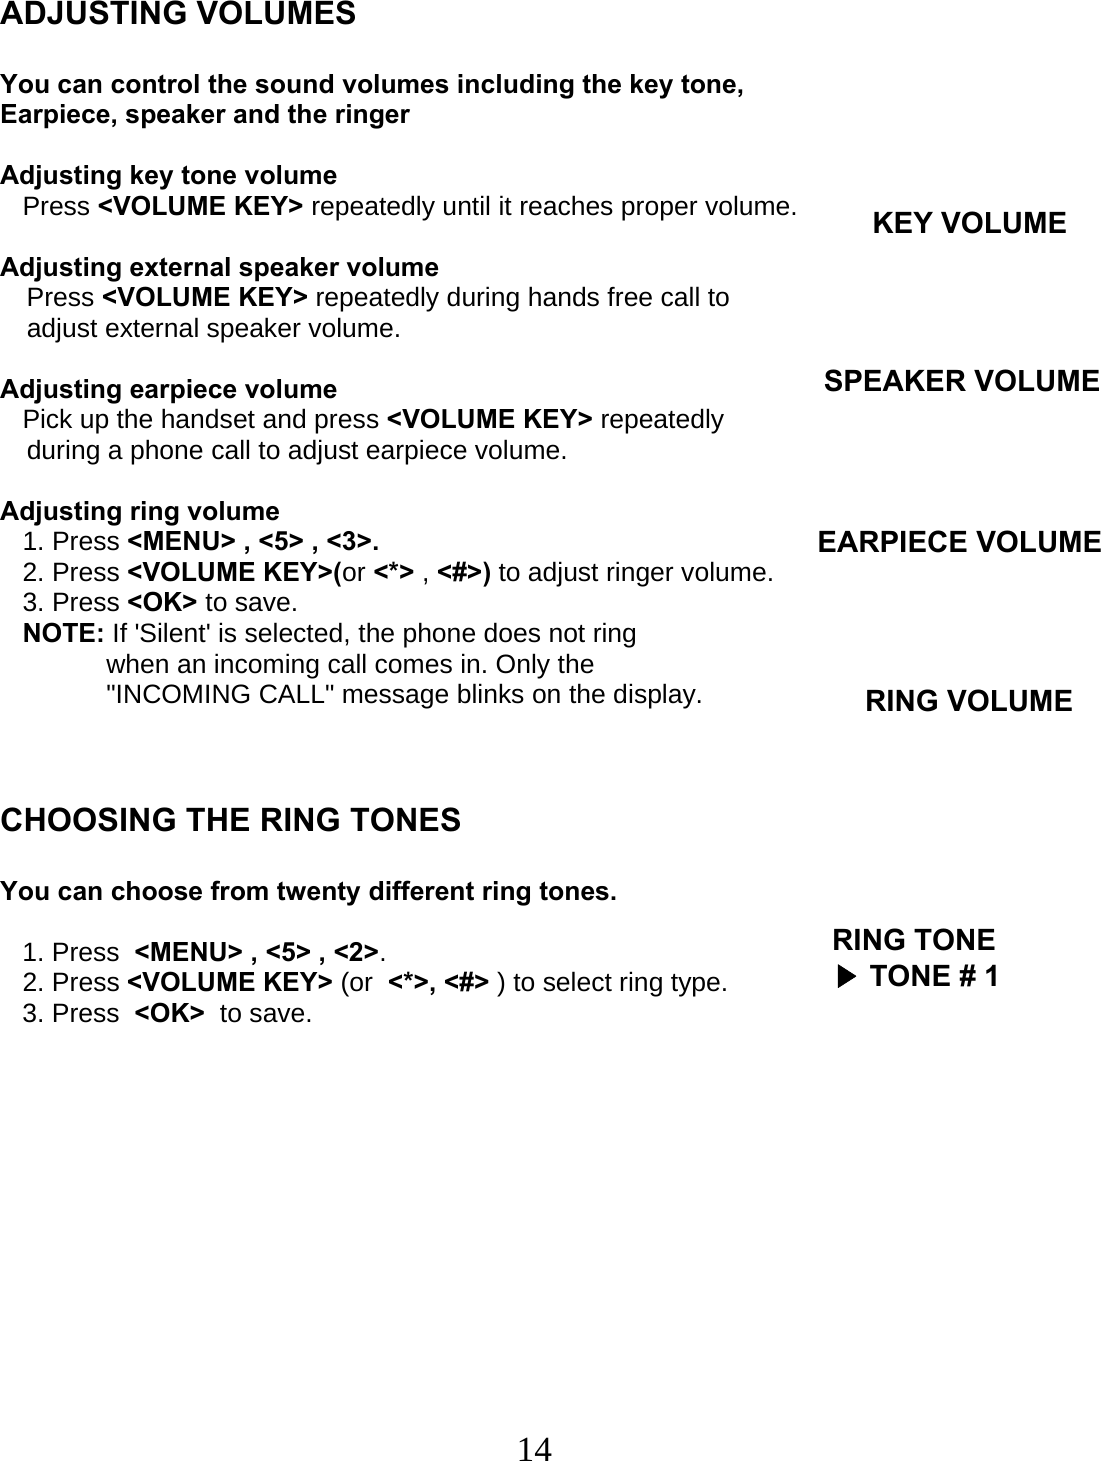  14   ADJUSTING VOLUMES  You can control the sound volumes including the key tone, Earpiece, speaker and the ringer  Adjusting key tone volume    Press &lt;VOLUME KEY&gt; repeatedly until it reaches proper volume.  Adjusting external speaker volume Press &lt;VOLUME KEY&gt; repeatedly during hands free call to  adjust external speaker volume.  Adjusting earpiece volume    Pick up the handset and press &lt;VOLUME KEY&gt; repeatedly  during a phone call to adjust earpiece volume.  Adjusting ring volume    1. Press &lt;MENU&gt; , &lt;5&gt; , &lt;3&gt;.    2. Press &lt;VOLUME KEY&gt;(or &lt;*&gt; , &lt;#&gt;) to adjust ringer volume.    3. Press &lt;OK&gt; to save.    NOTE: If &apos;Silent&apos; is selected, the phone does not ring  when an incoming call comes in. Only the &quot;INCOMING CALL&quot; message blinks on the display.    CHOOSING THE RING TONES  You can choose from twenty different ring tones.     1. Press  &lt;MENU&gt; , &lt;5&gt; , &lt;2&gt;.    2. Press &lt;VOLUME KEY&gt; (or  &lt;*&gt;, &lt;#&gt; ) to select ring type.    3. Press  &lt;OK&gt;  to save.KEY VOLUMESPEAKER VOLUME EARPIECE VOLUME RING VOLUMERING TONE▶ TONE # 1